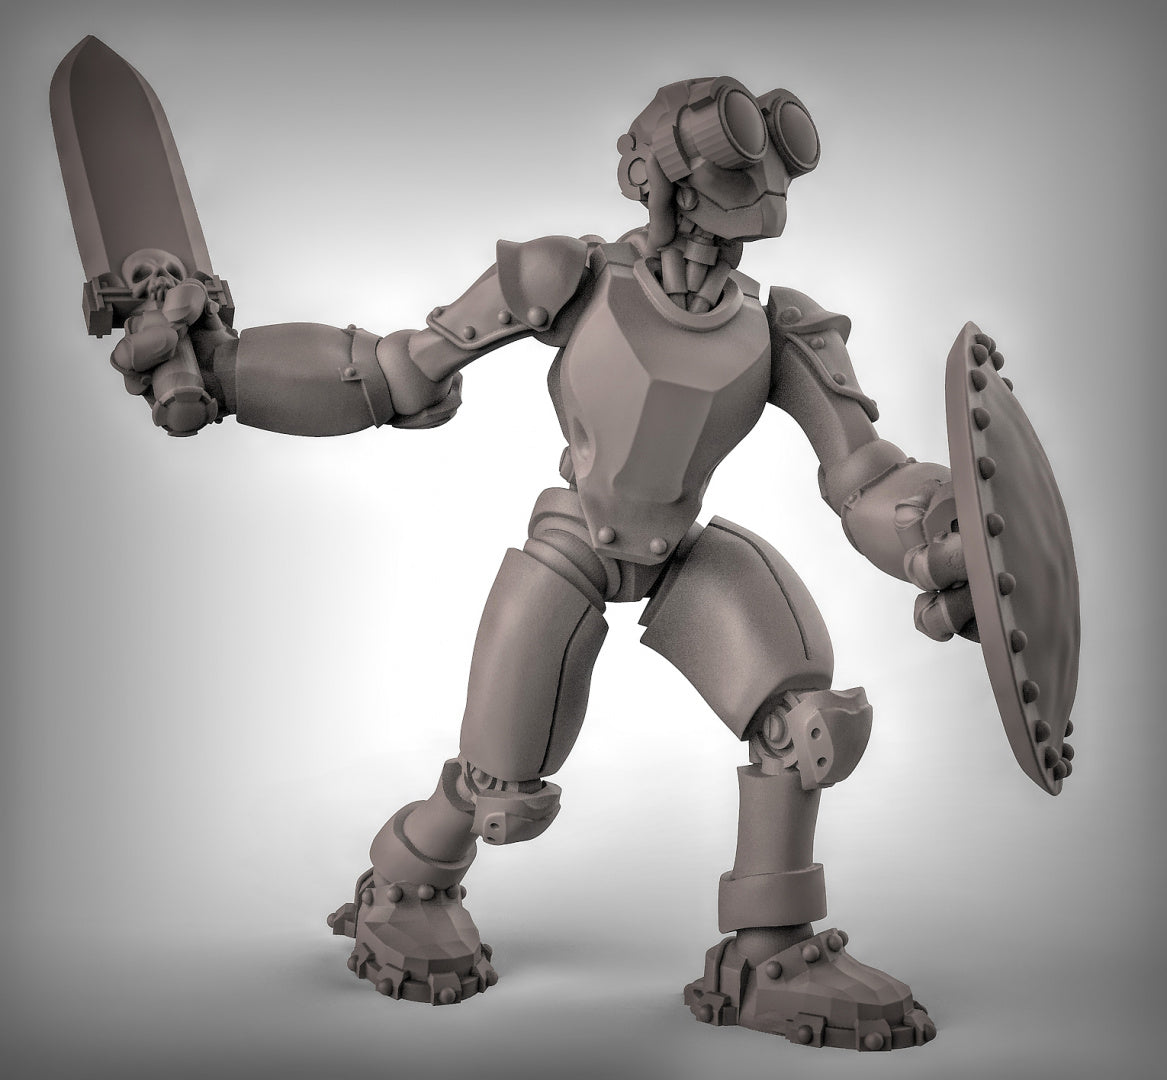 Warforged with Swords and Shields Resin Miniature for DnD | Tabletop Gaming